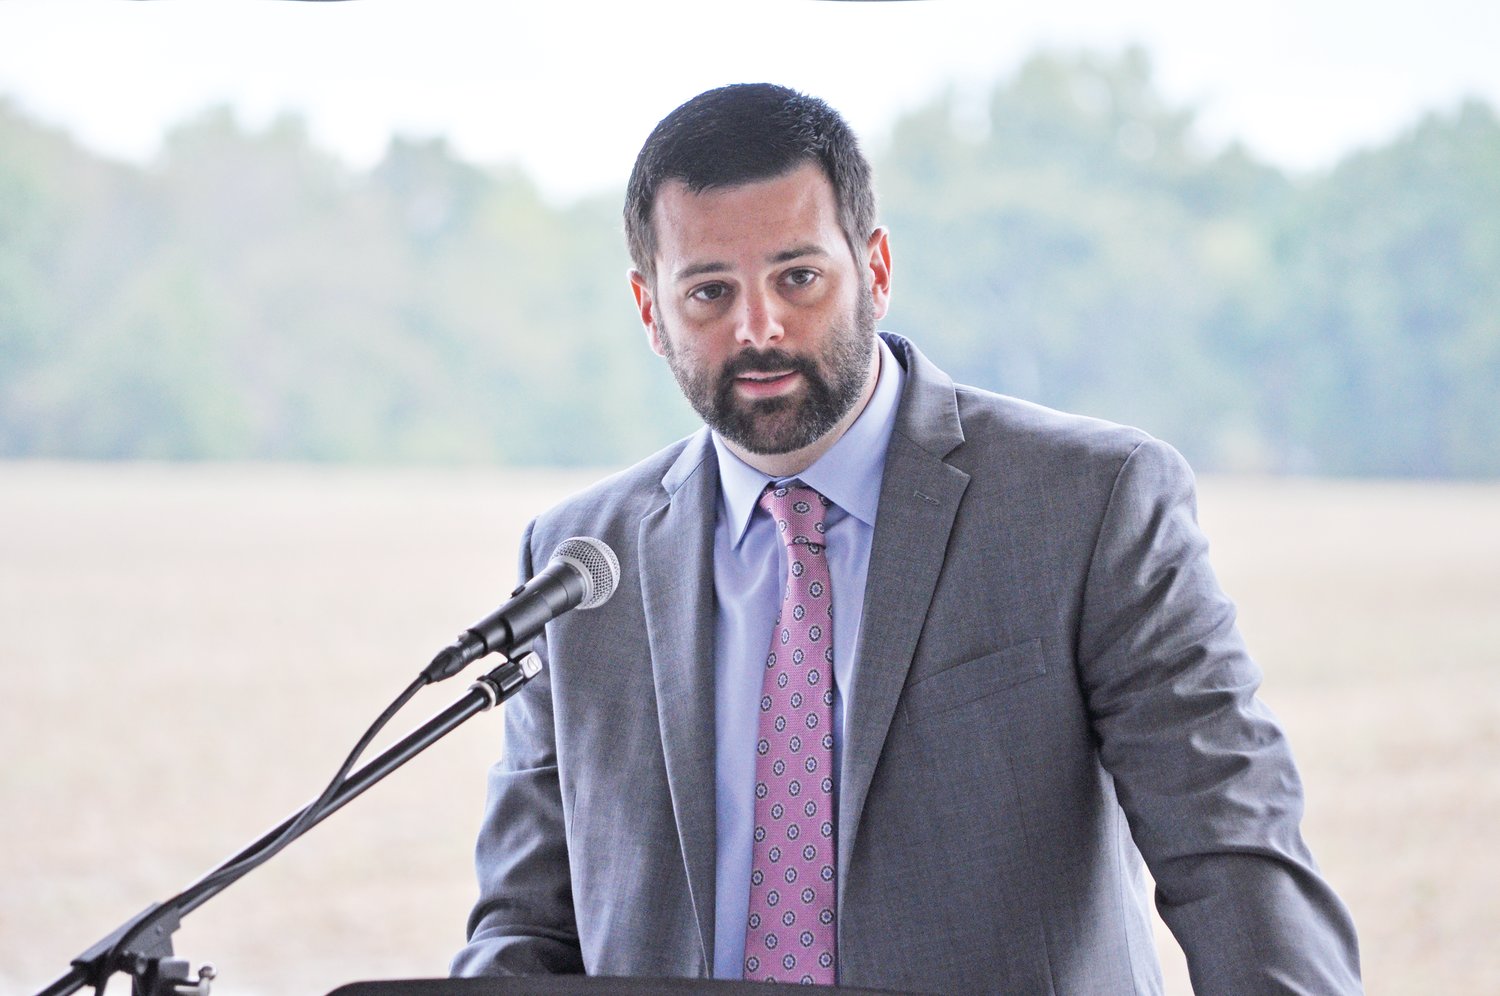 David Rosenberg, executive vice president of the Indiana Economic Development Corp., speaks at a groundbreaking ceremony for the Tempur Sealy plant on Thursday.